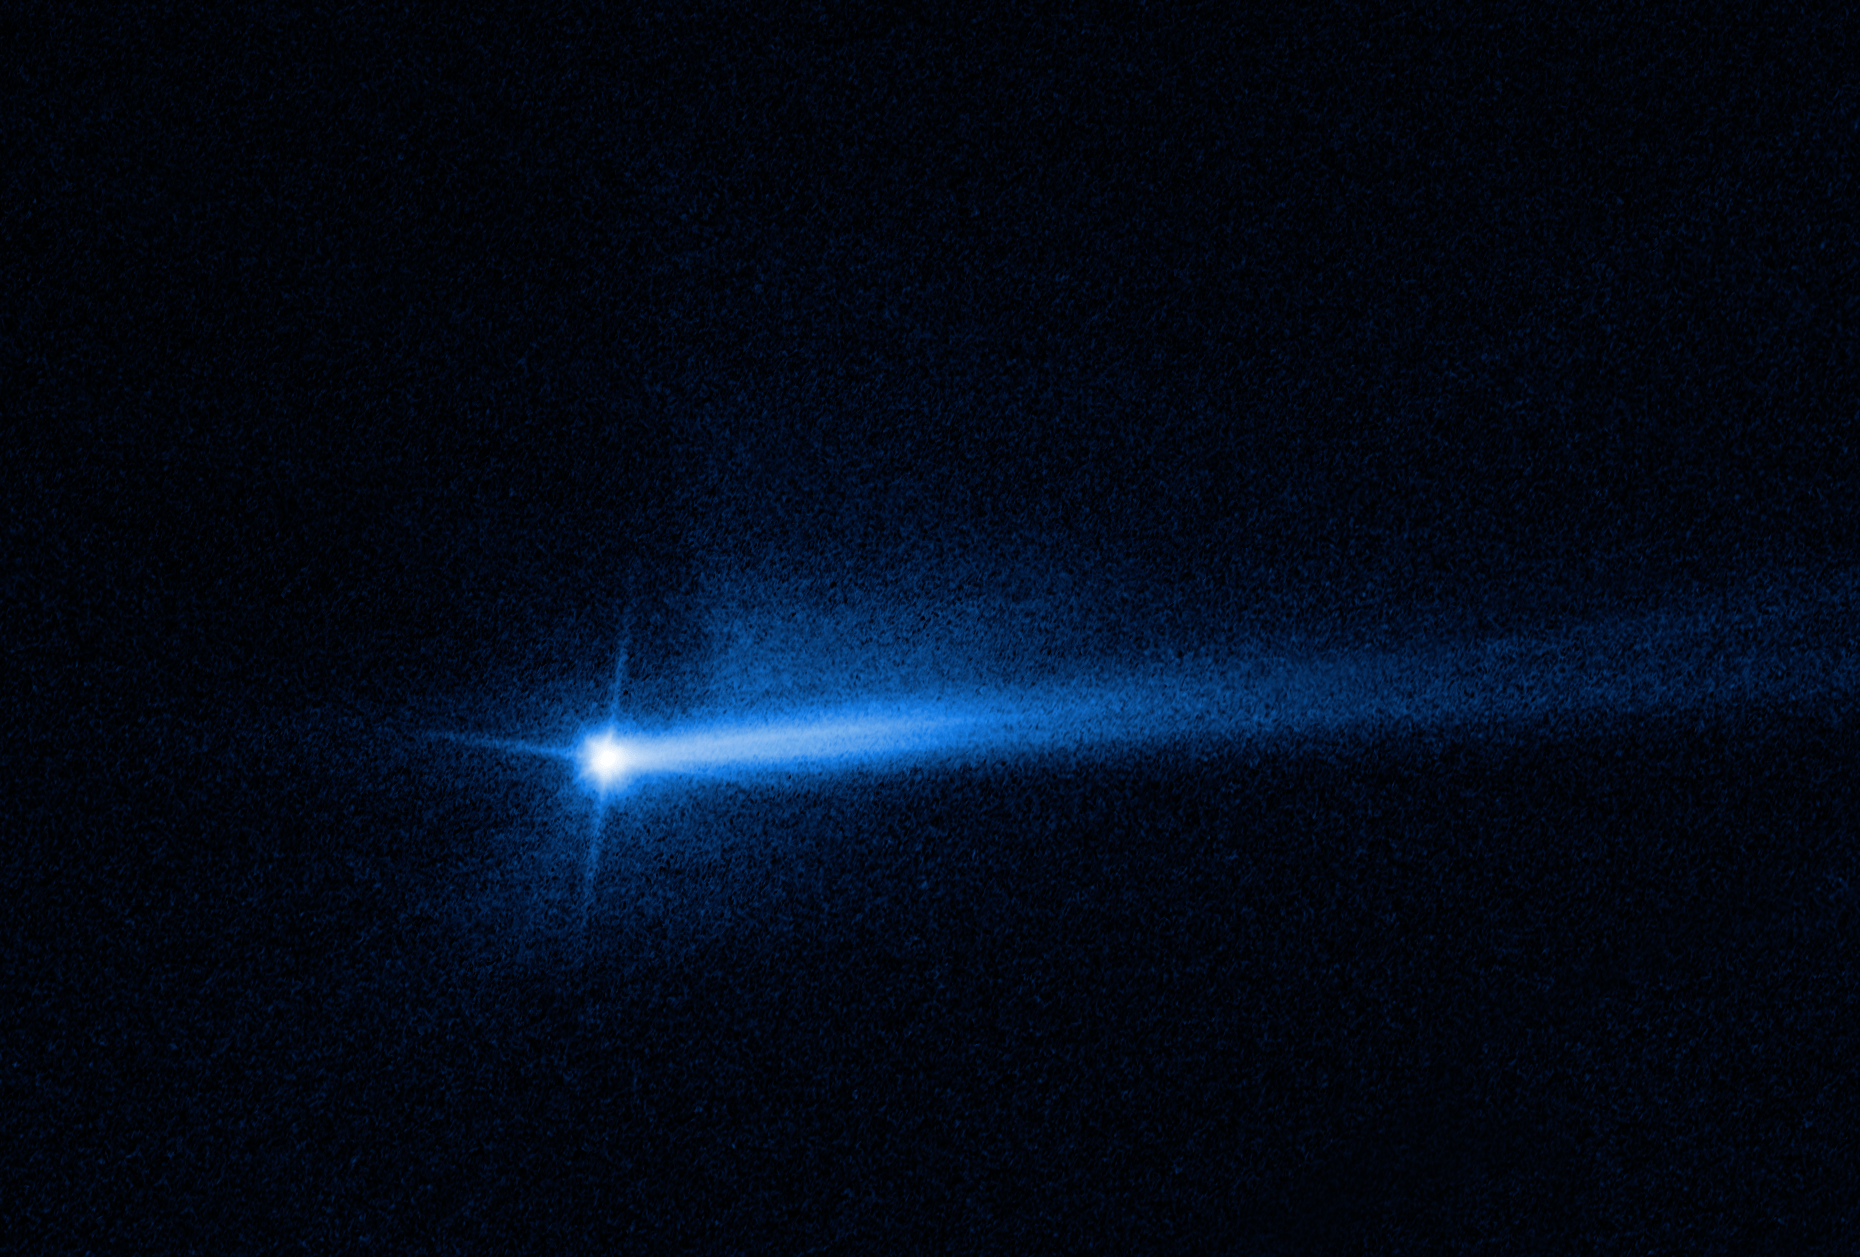 Bright, blue-white tail extends to the right side of the image from a blue-white, star-like point just left of image center. dark black background.